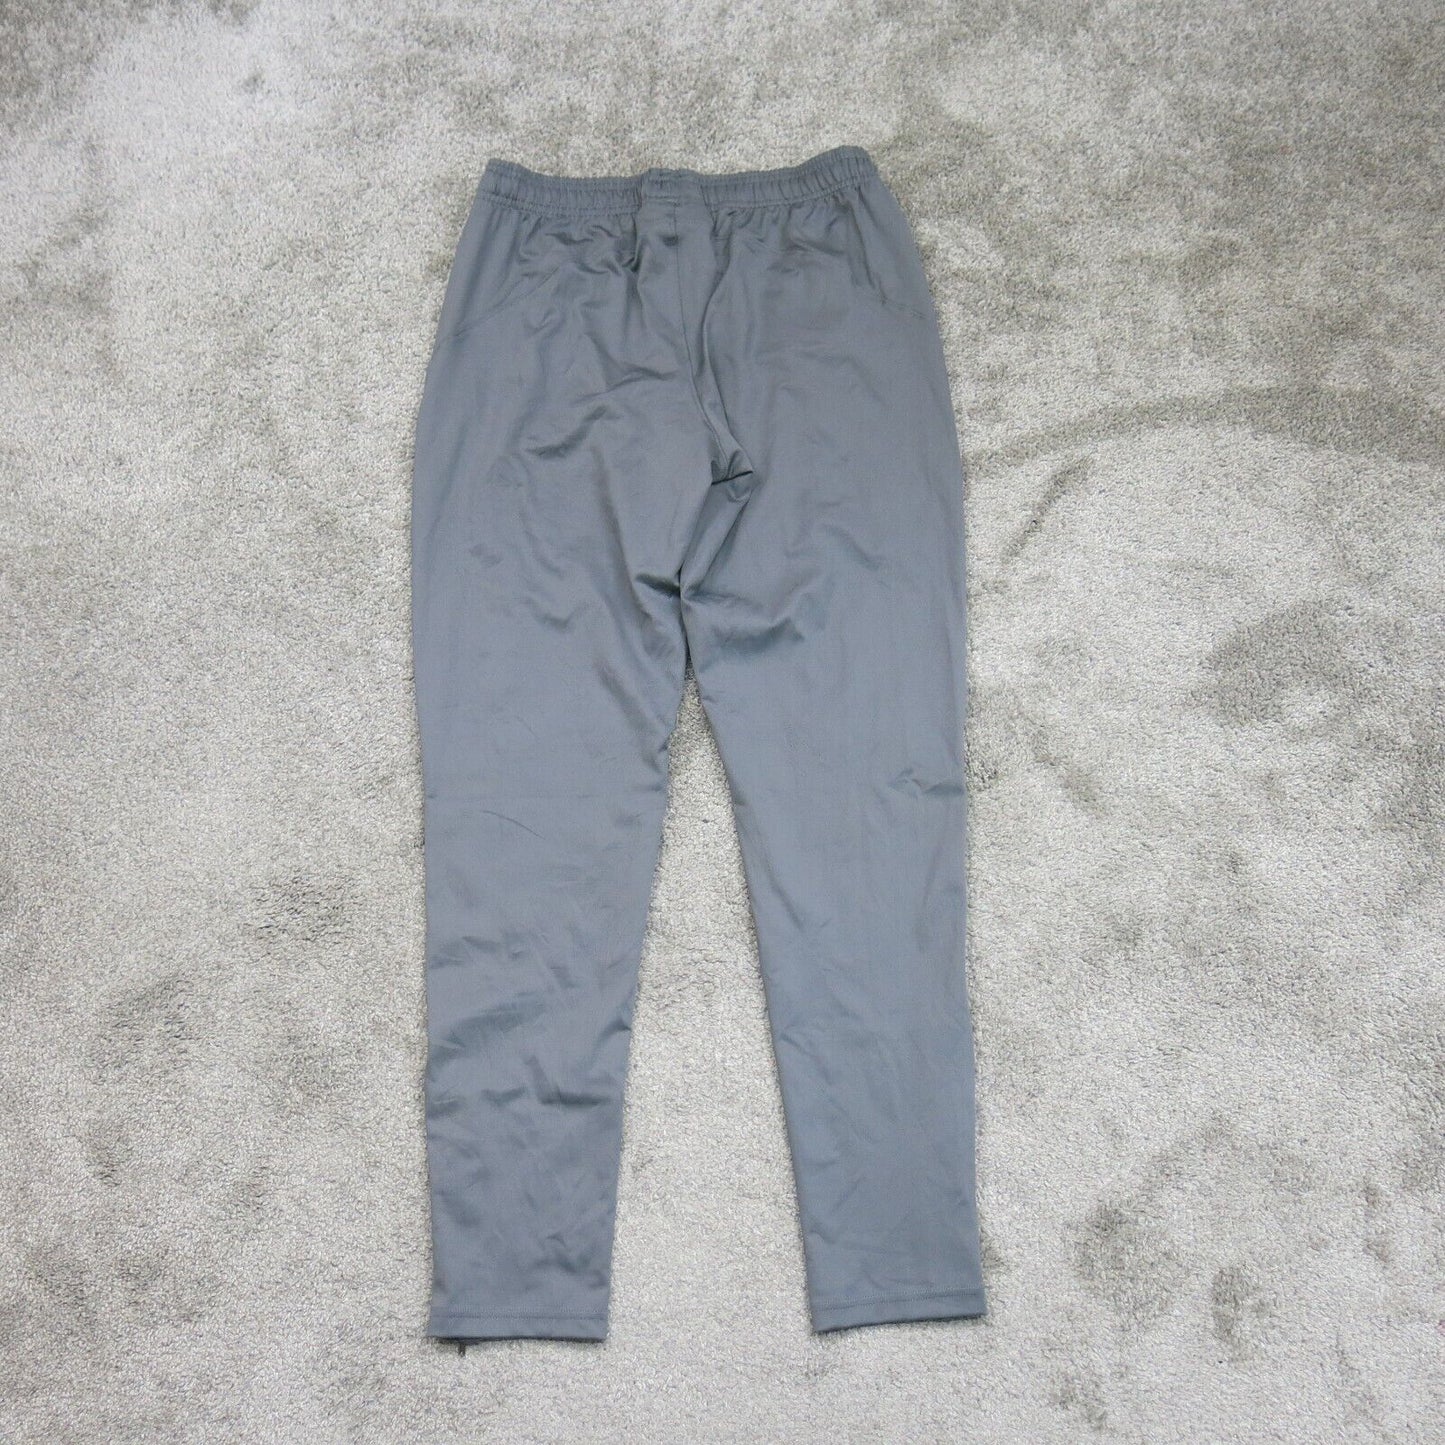 Under Armour Womens Activewear Track Pants Low Rise Elastic Waist Gray Size S